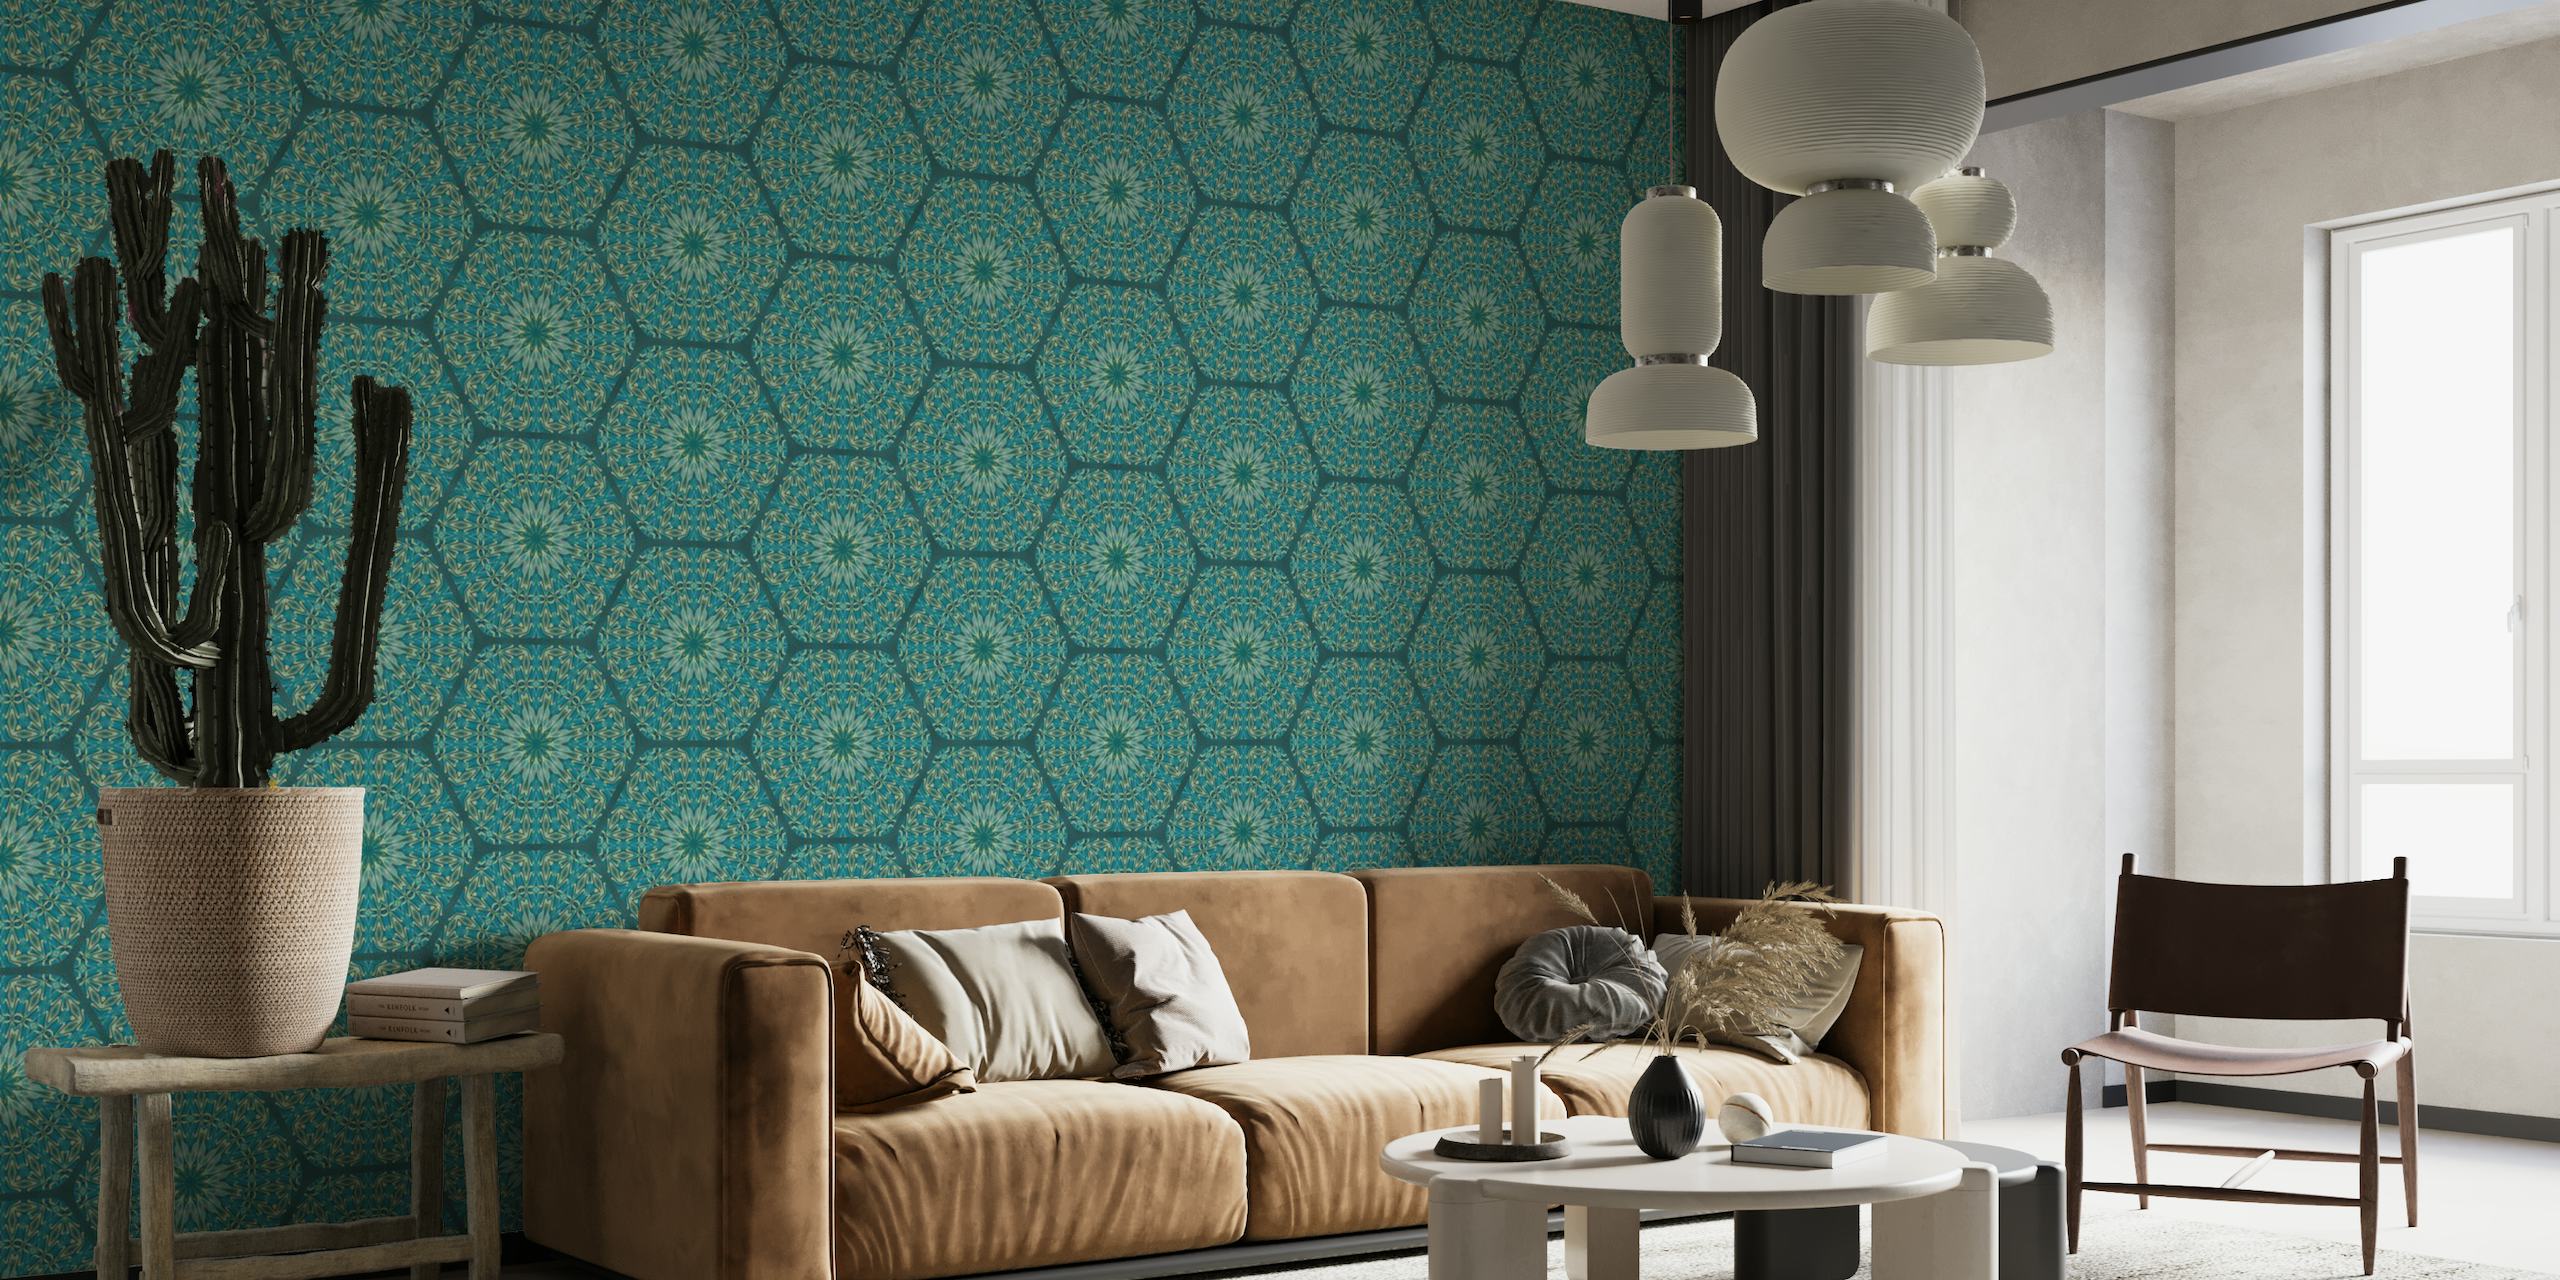 Oriental Inpired Tiles Mediterranean Pattern Teal And Gold tapete